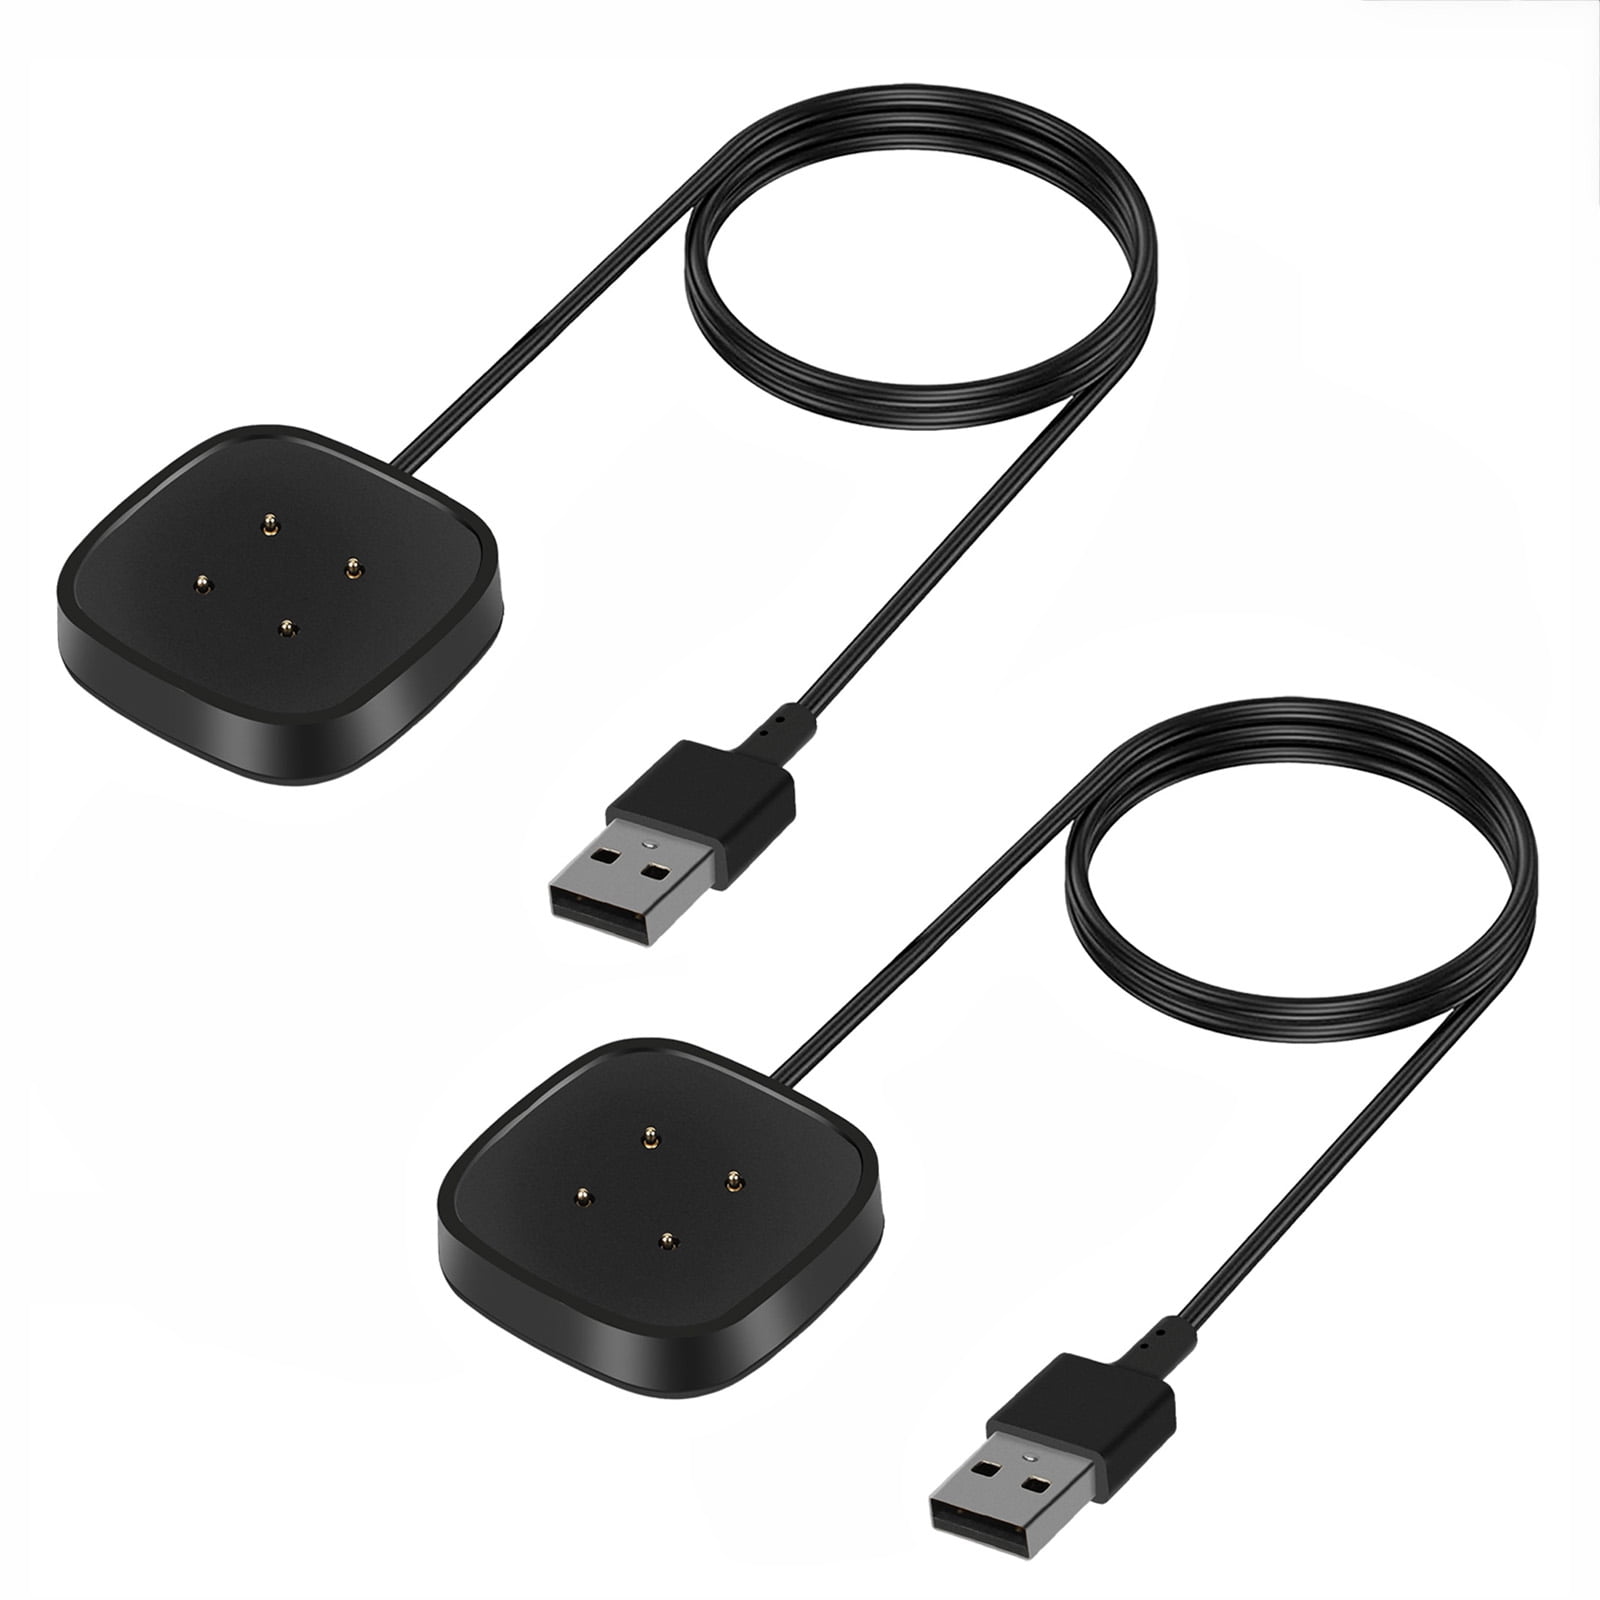 For Fitbit Versa 2 USB Charging Cable Power Charger Dock Cradle Replacement 